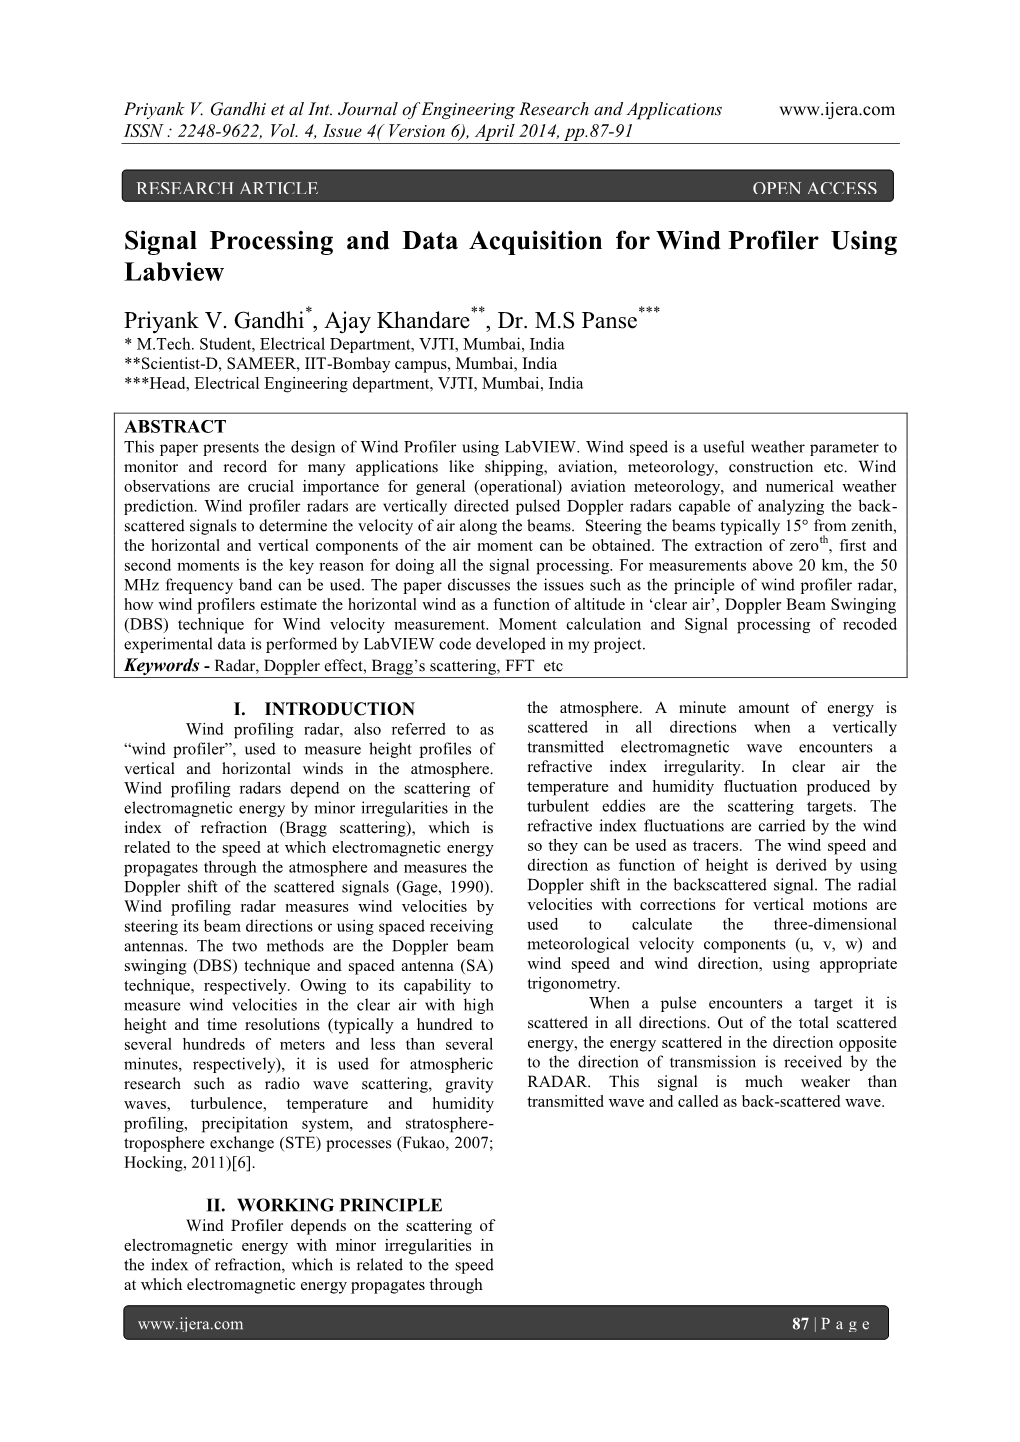 Signal Processing and Data Acquisition for Wind Profiler Using Labview